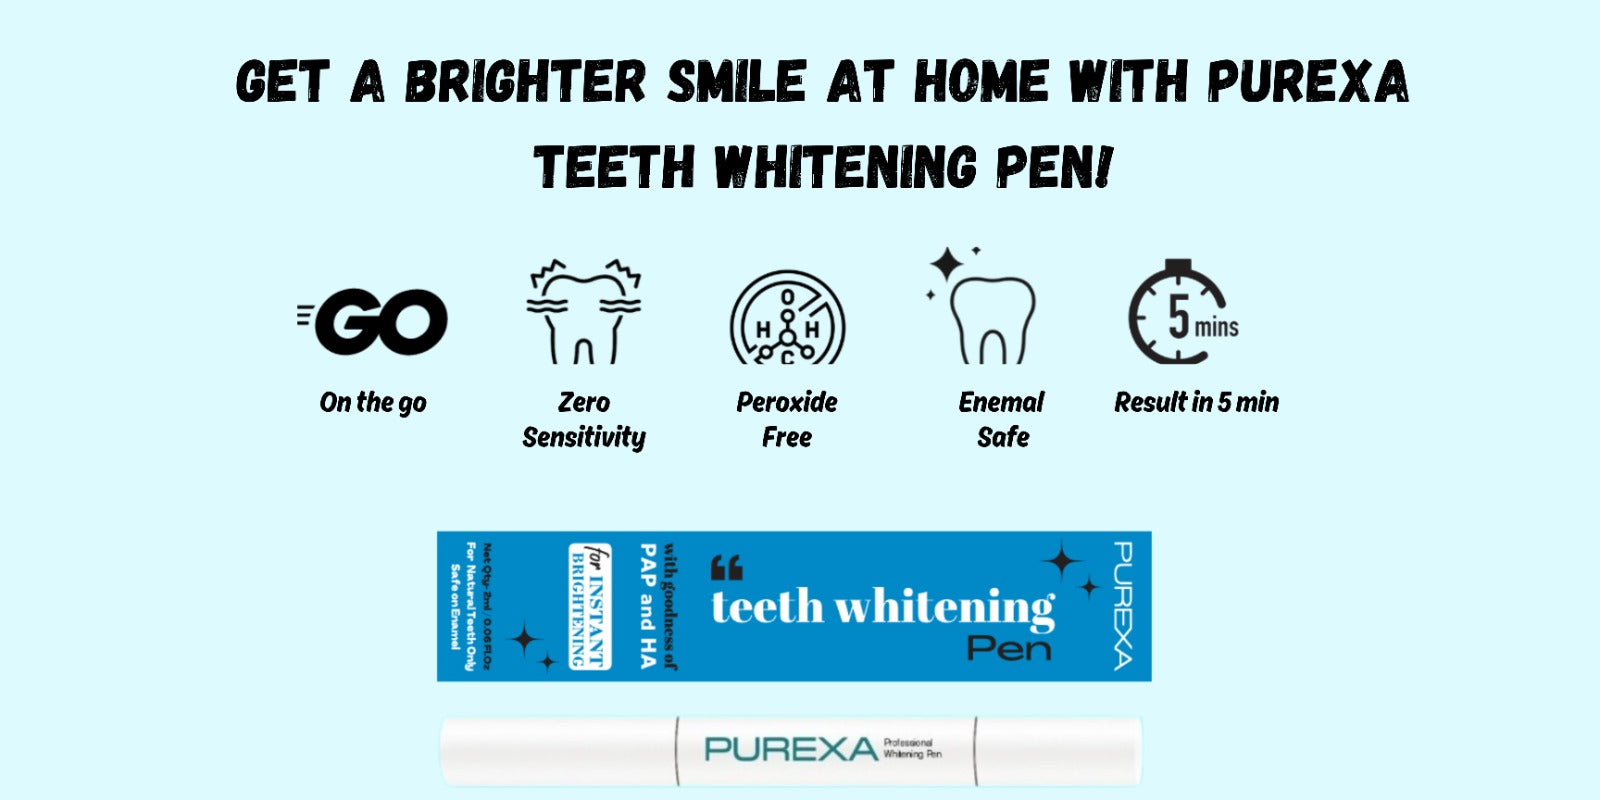 Get a Brighter Smile at Home with Purexa Teeth Whitening Pen!